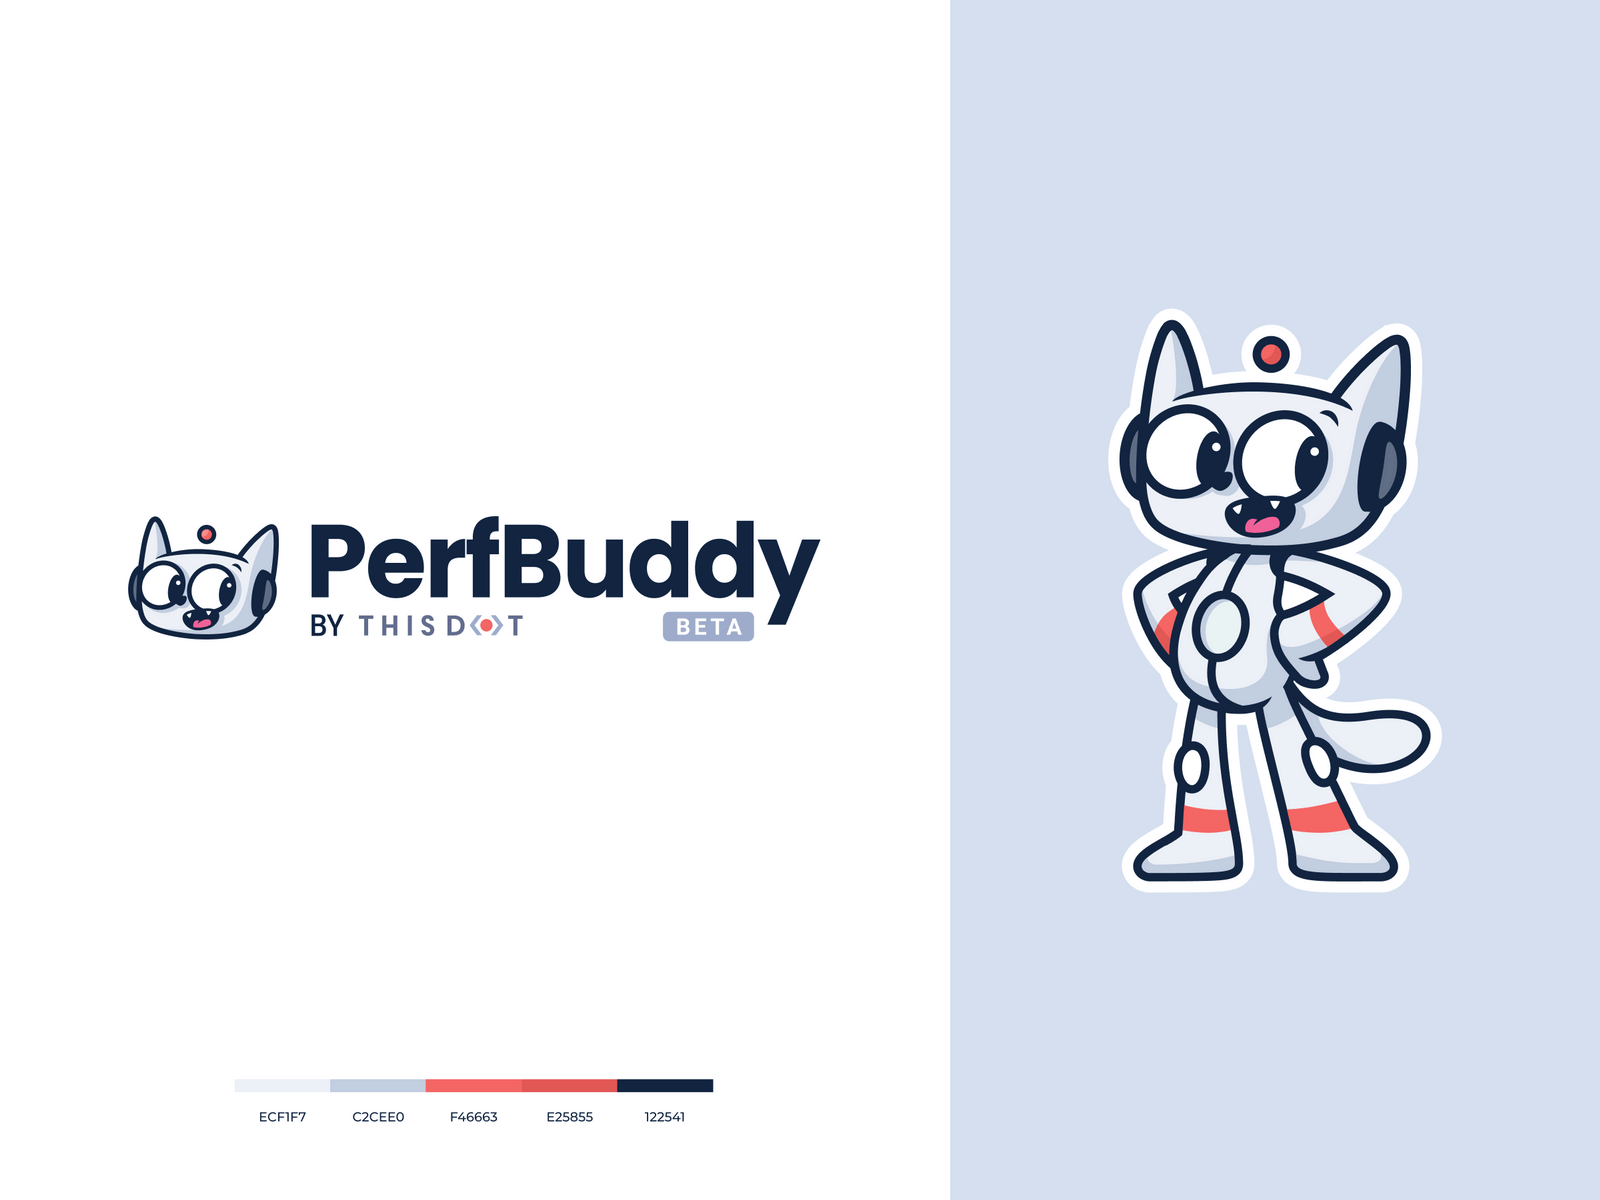 Perfbuddy logo on the left and mascot right